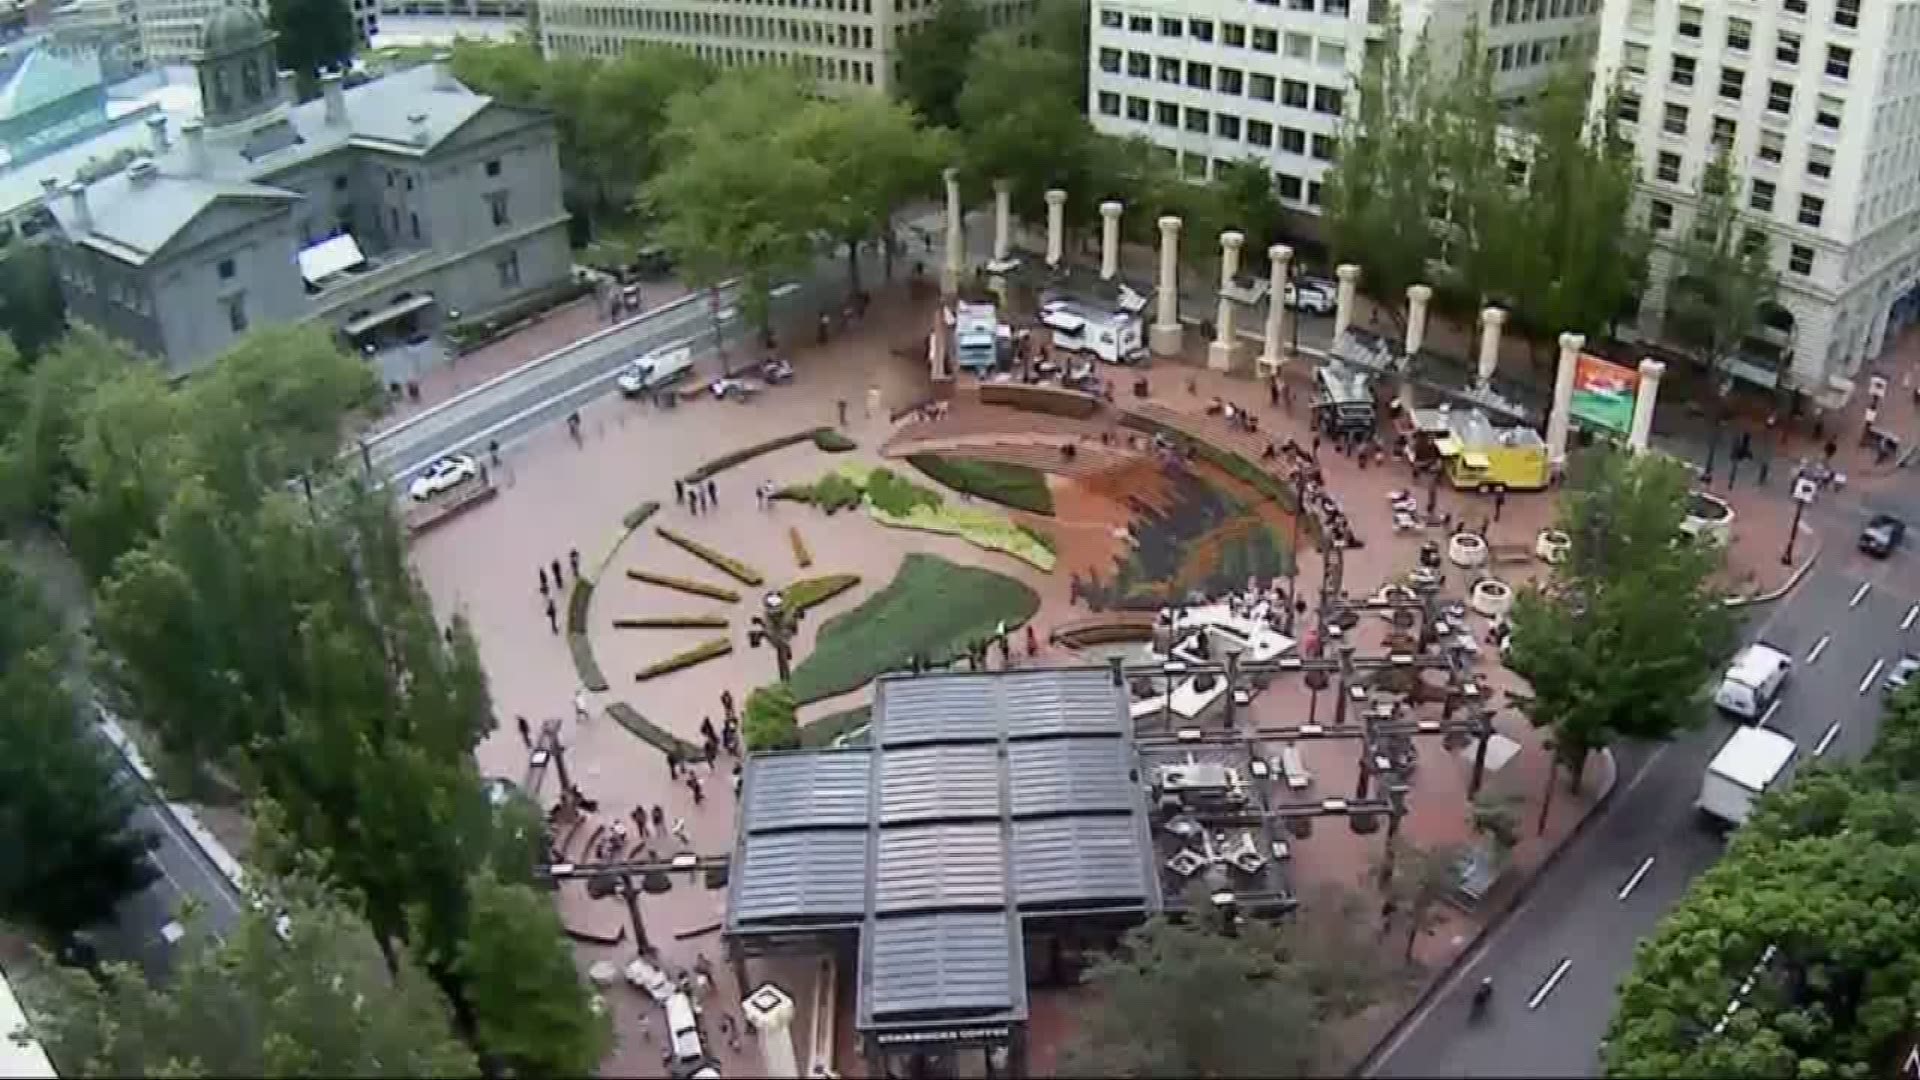 Festival of flowers take over the square